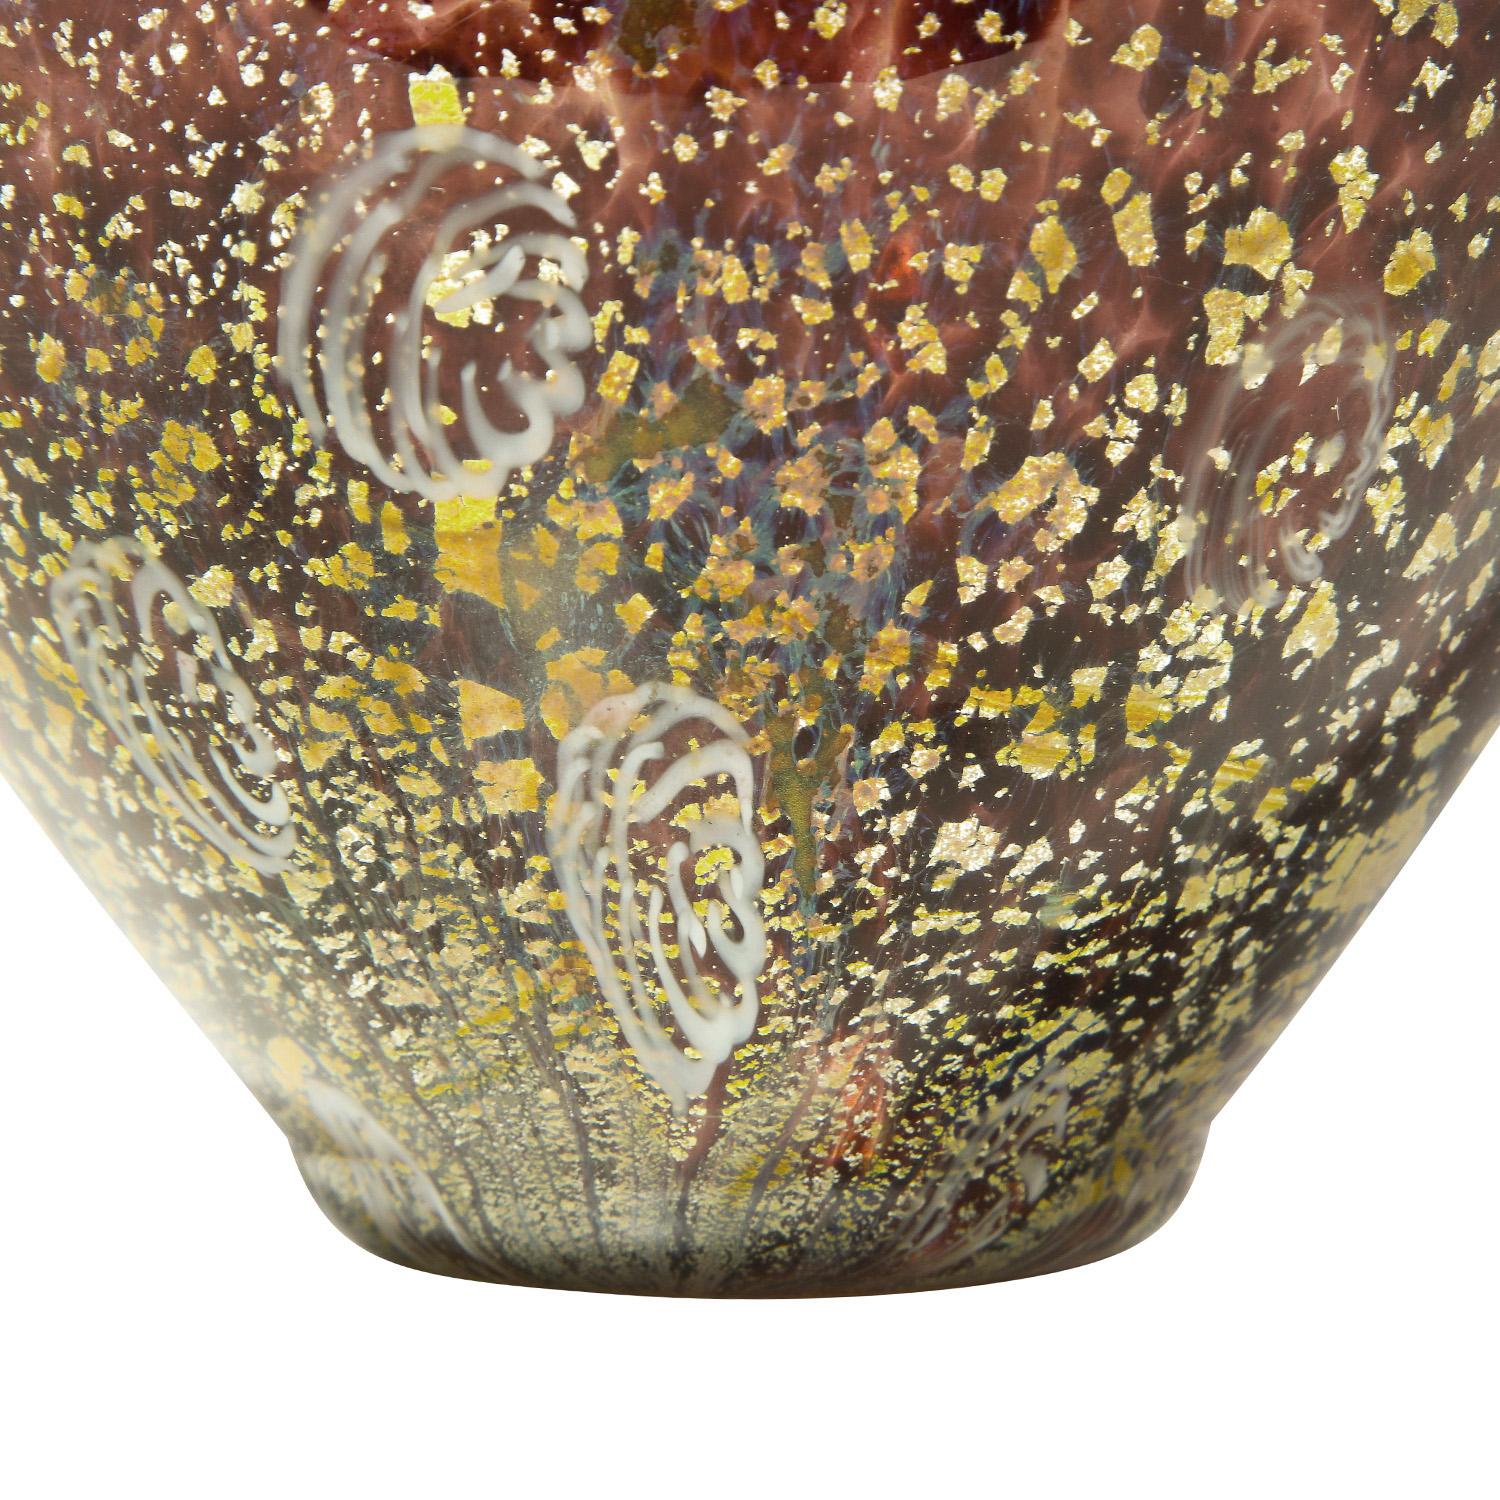 Italian Giulio Radi Amber Glass Vase with Gold Foil and Murrhines, 1950 For Sale